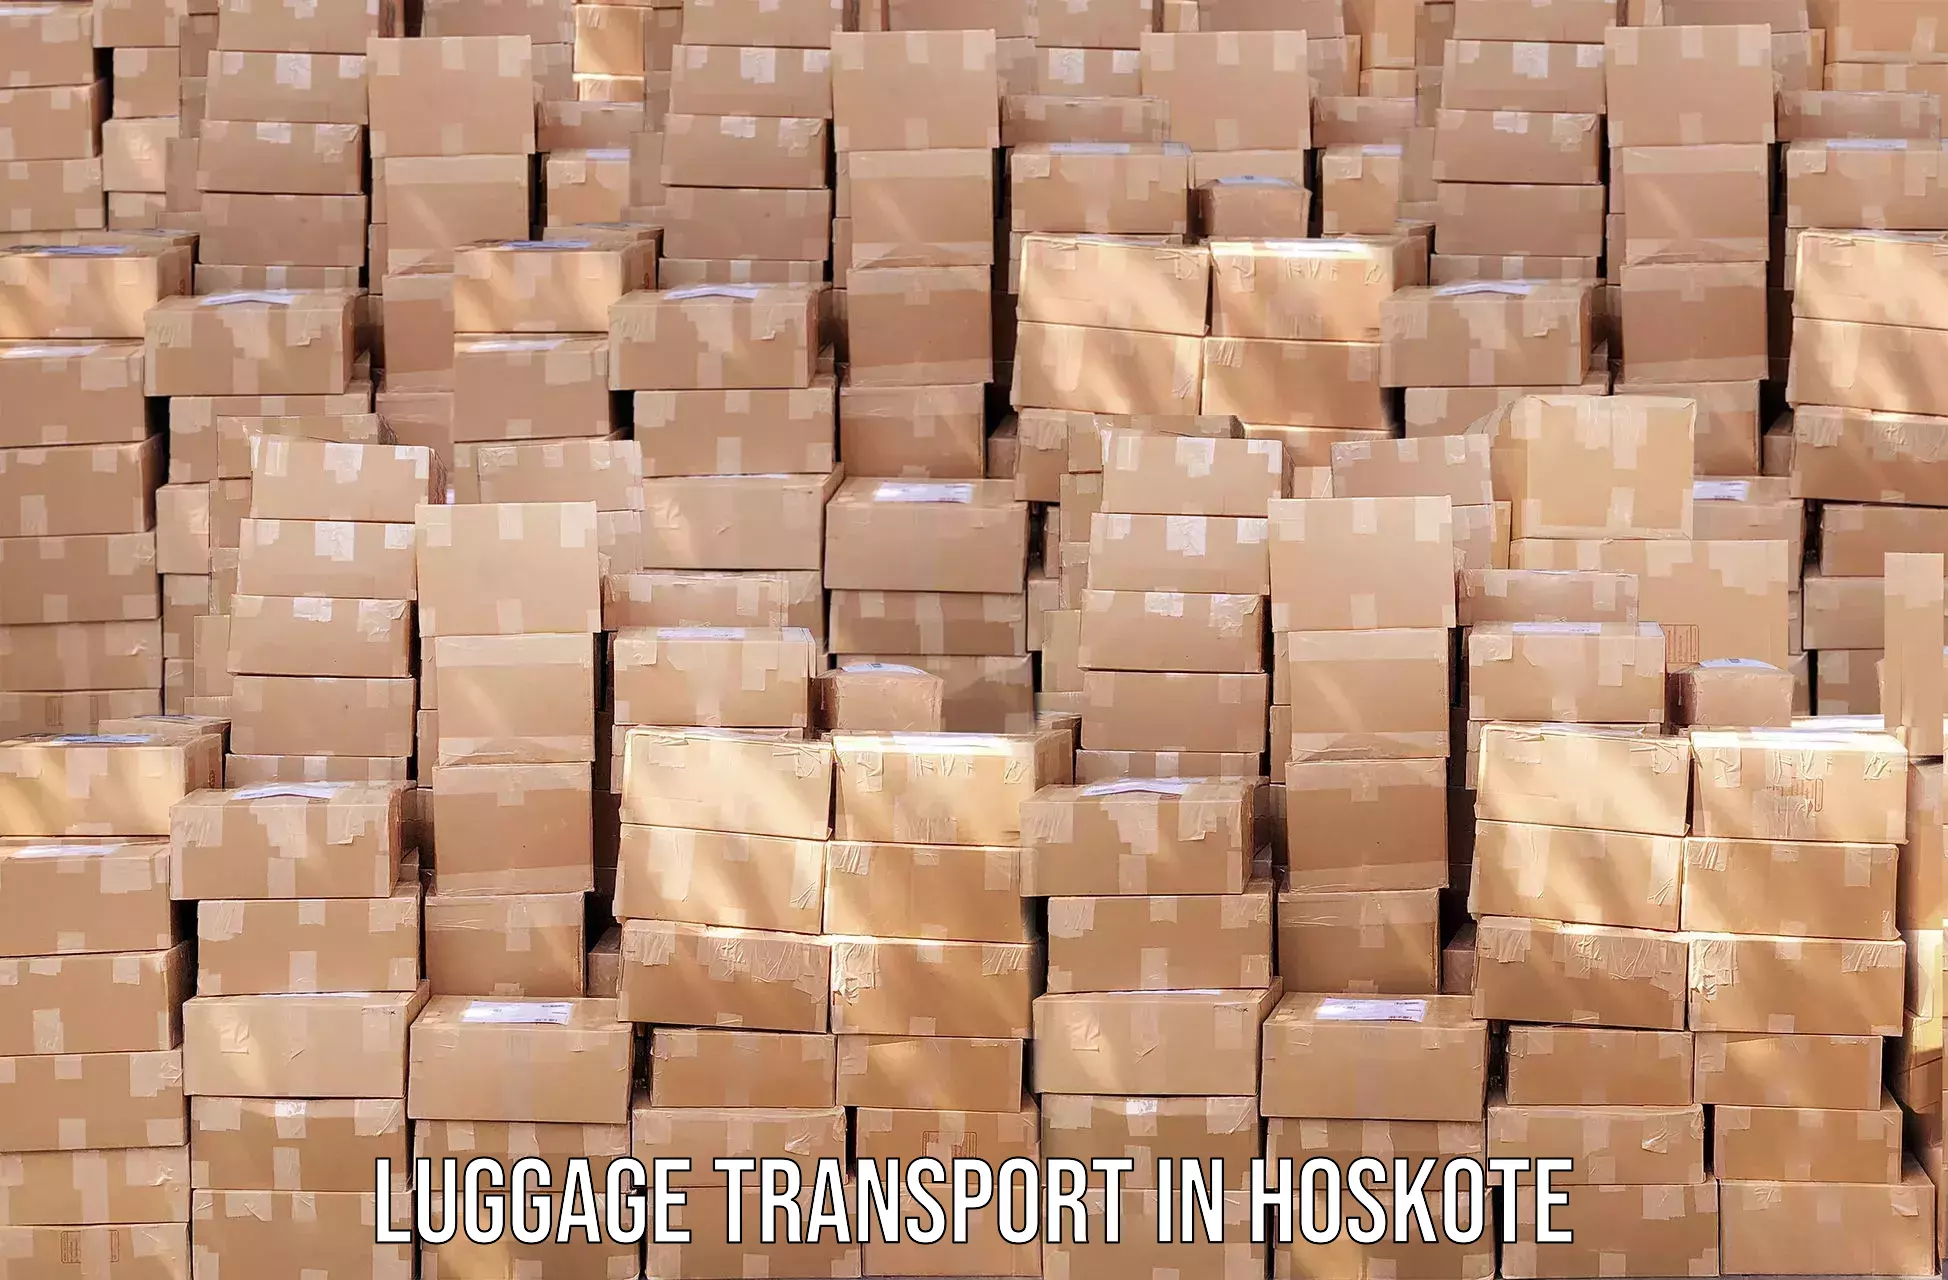 Luggage delivery system in Hoskote